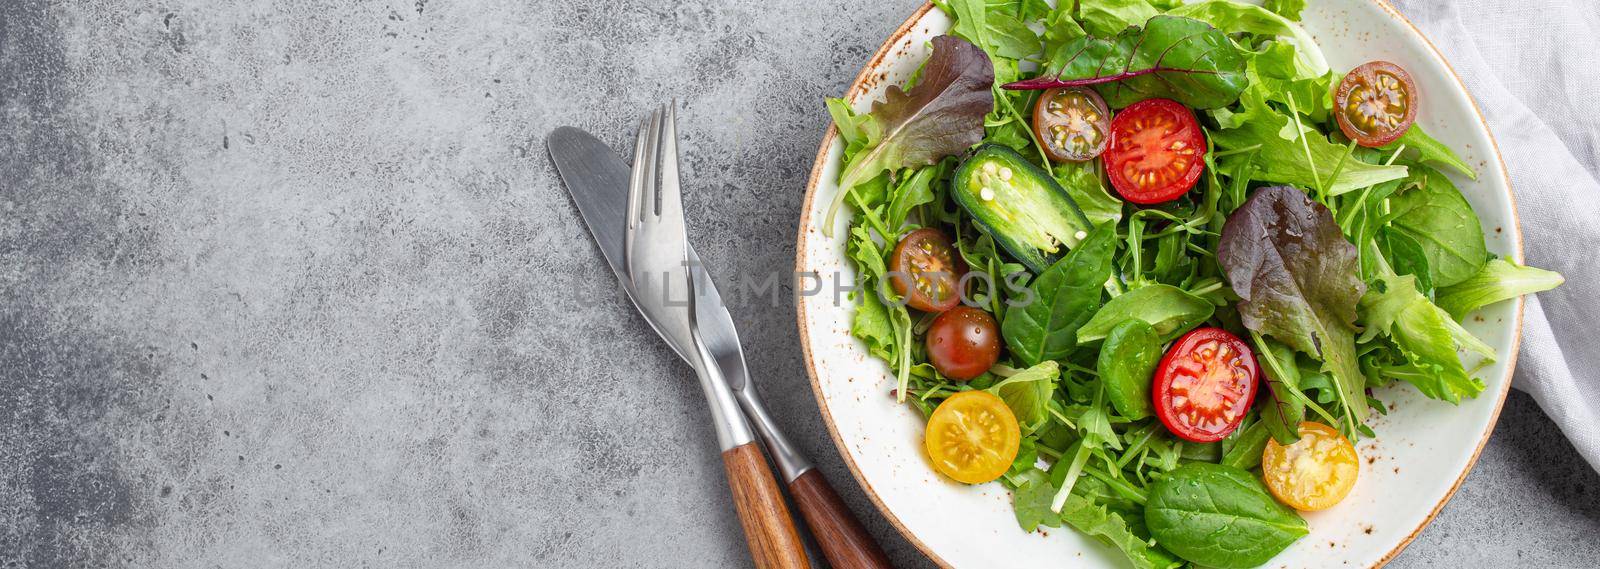 Vegetables healthy salad with red and yellow cherry tomatoes, pepper and green salad leafs on white rustic ceramic plate on gray concrete background top view, healthy food and diet concept, copy space